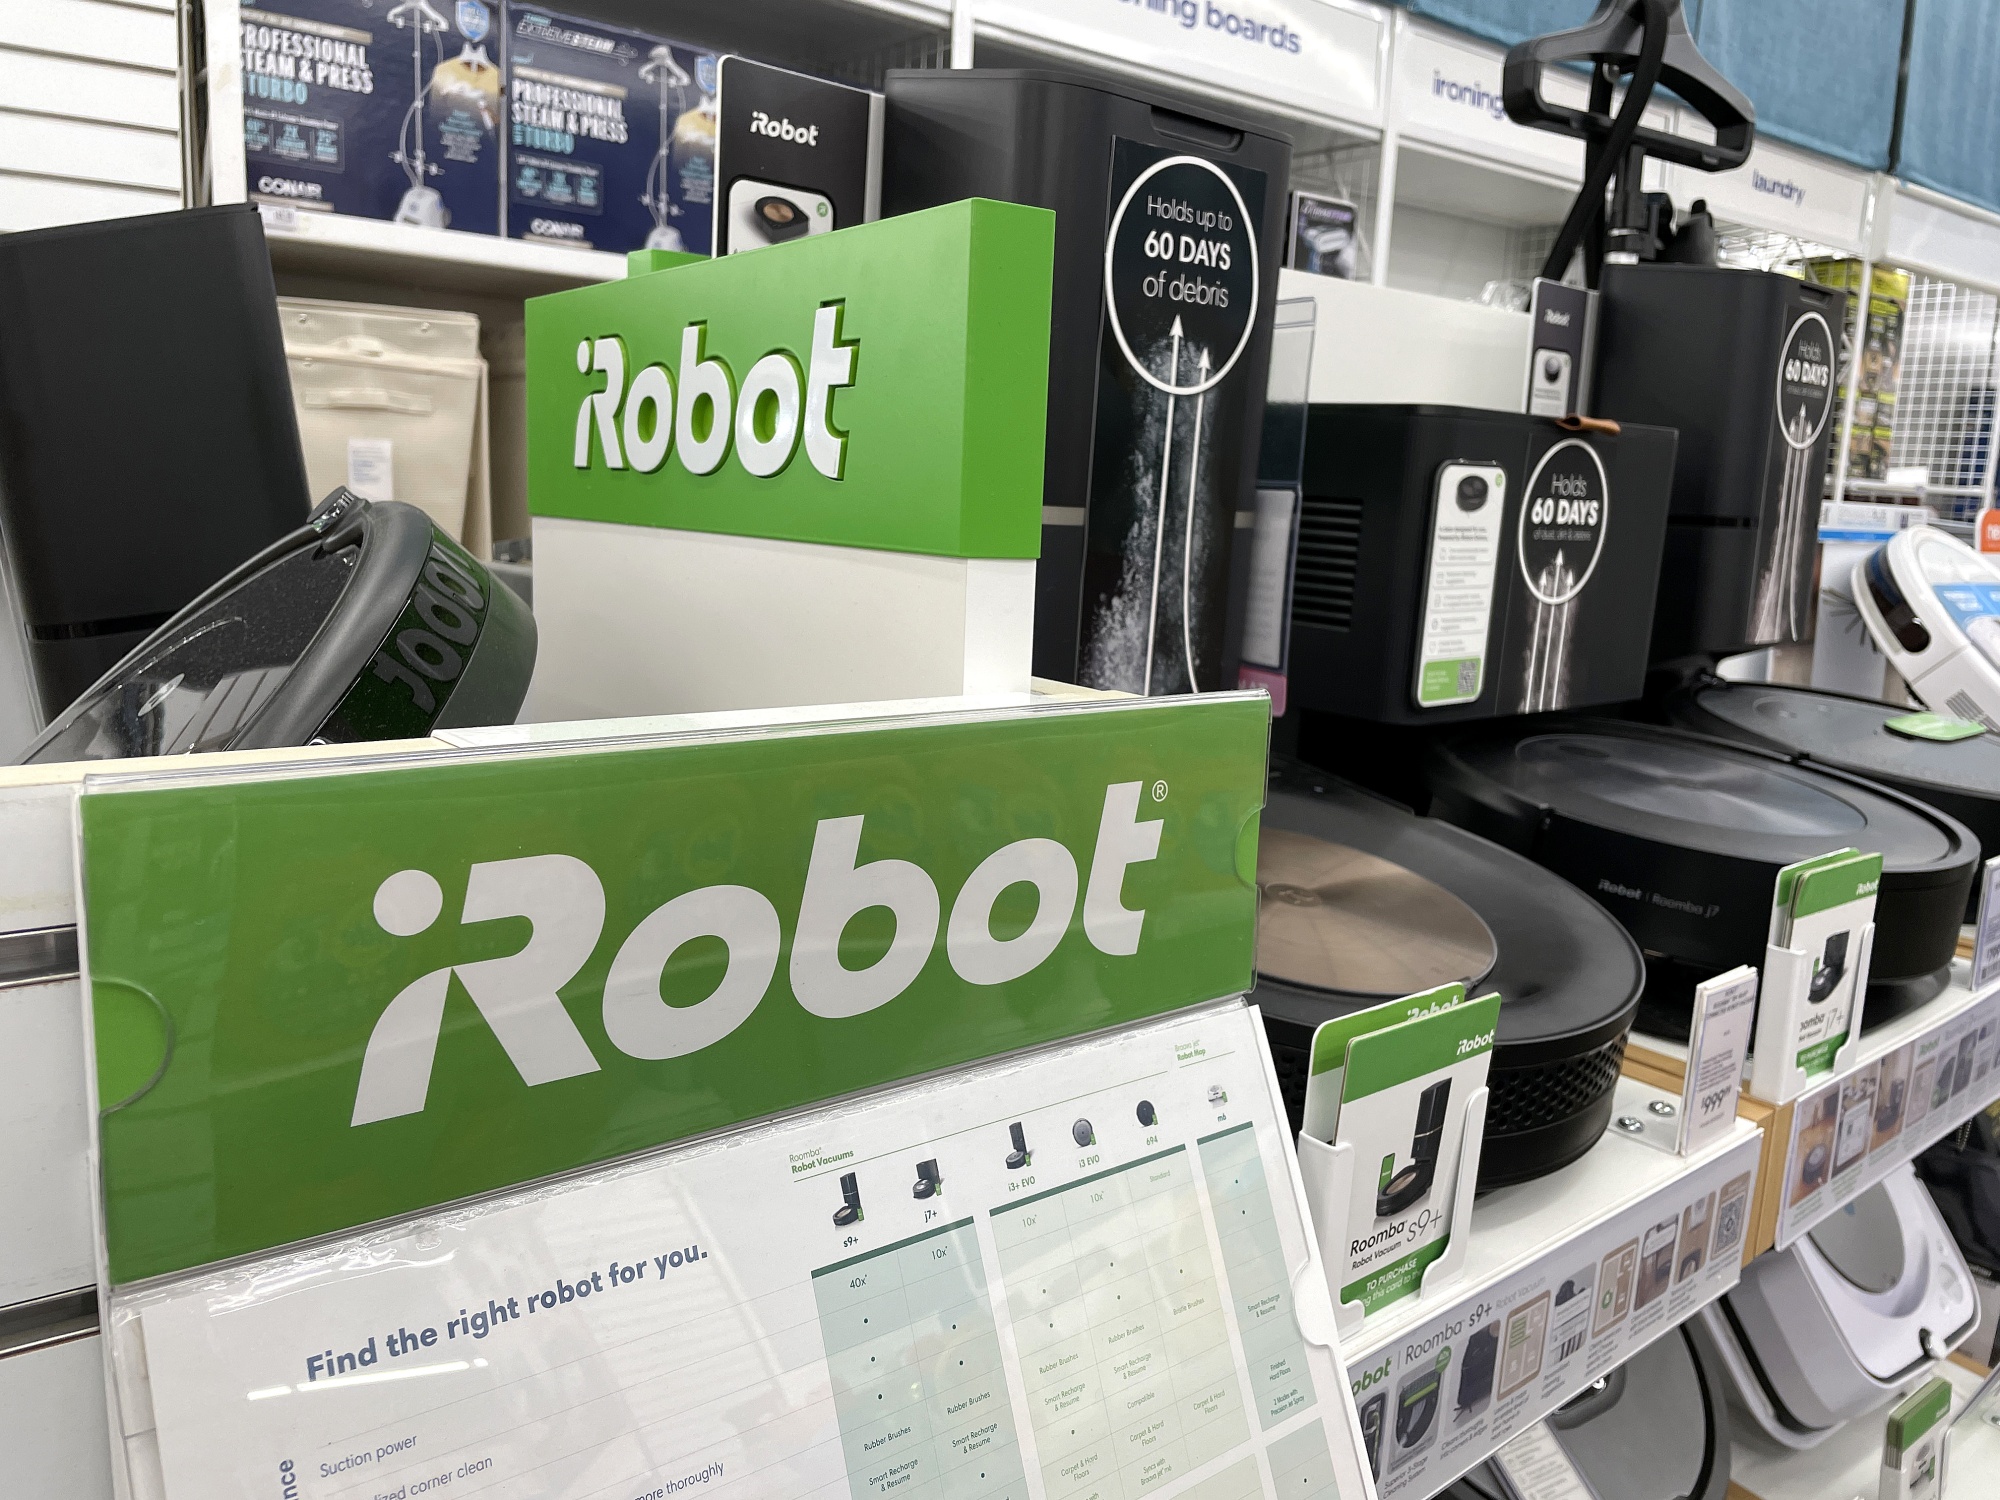 vaskepulver Kontrakt Luscious Amazon's iRobot Deal Gets UK Competition and Markets Authority Clearance  (AMZN) - Bloomberg